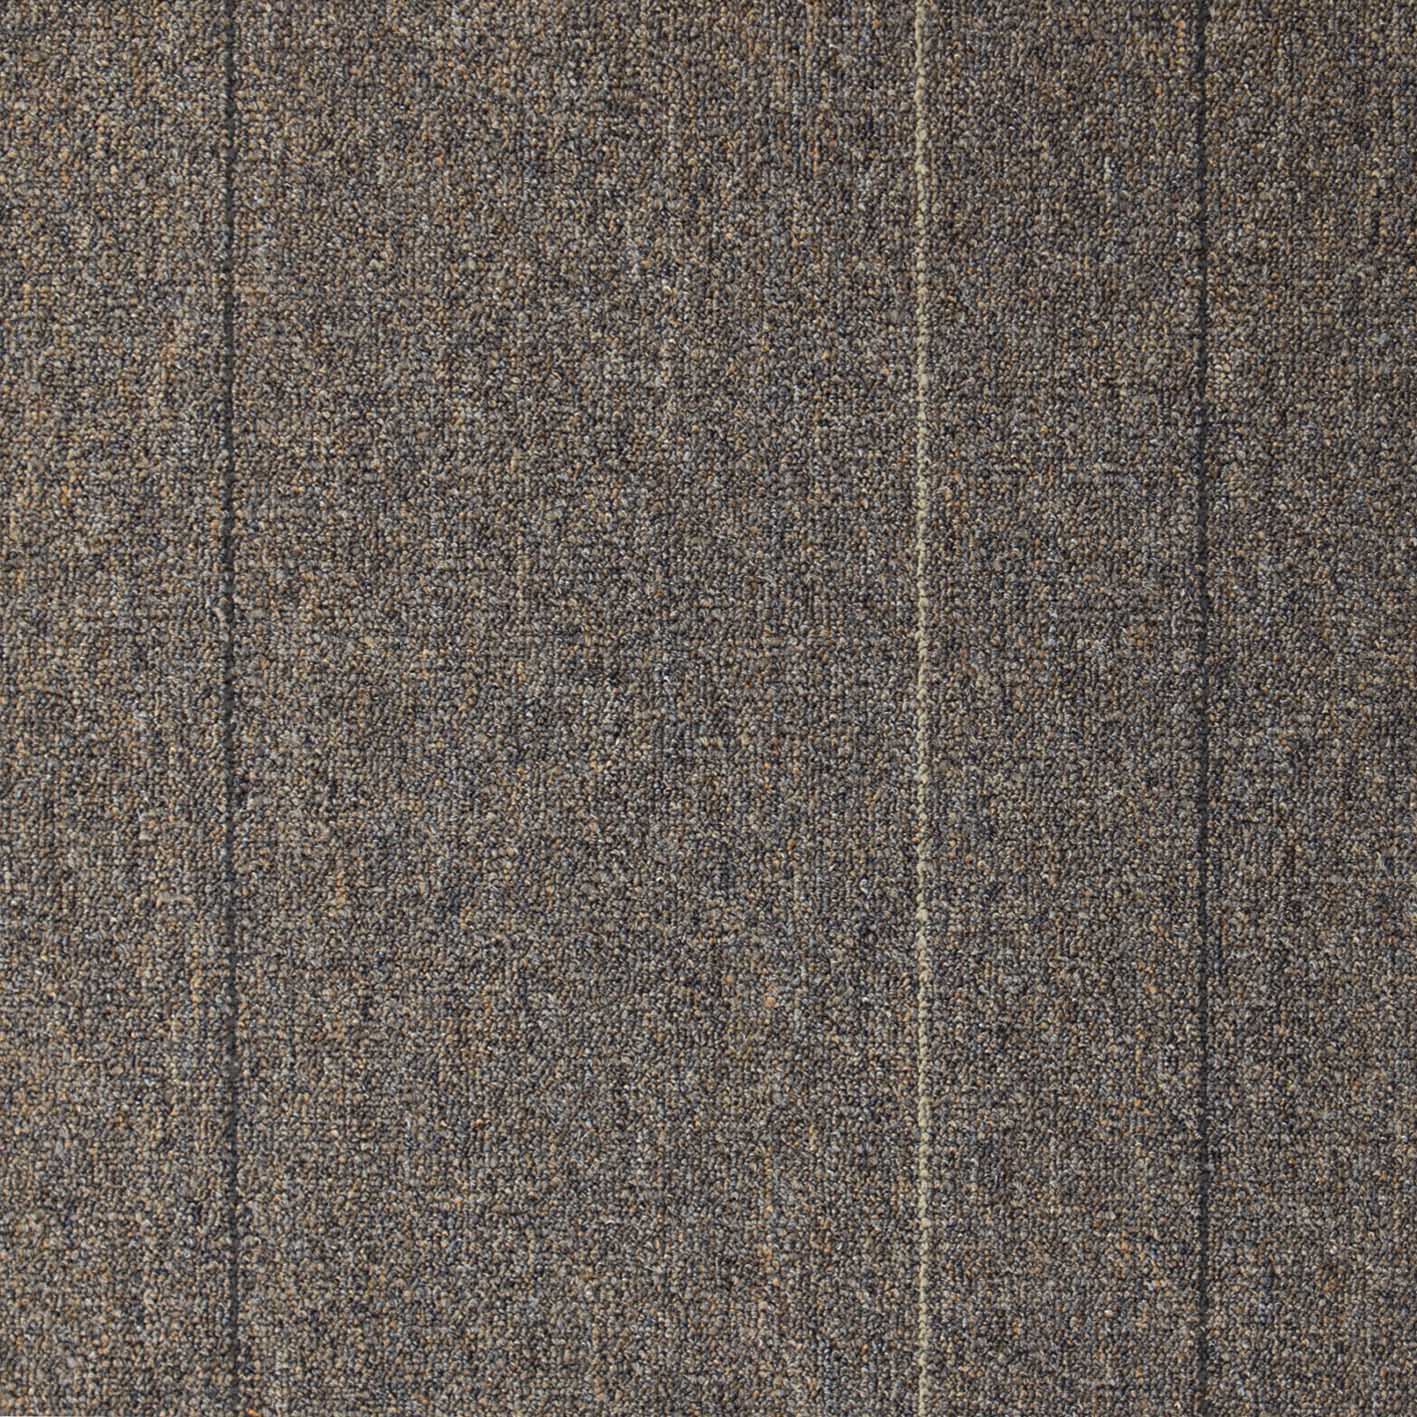 TACK145 Amazon Commercial Office Carpet Rug Tiles Factory